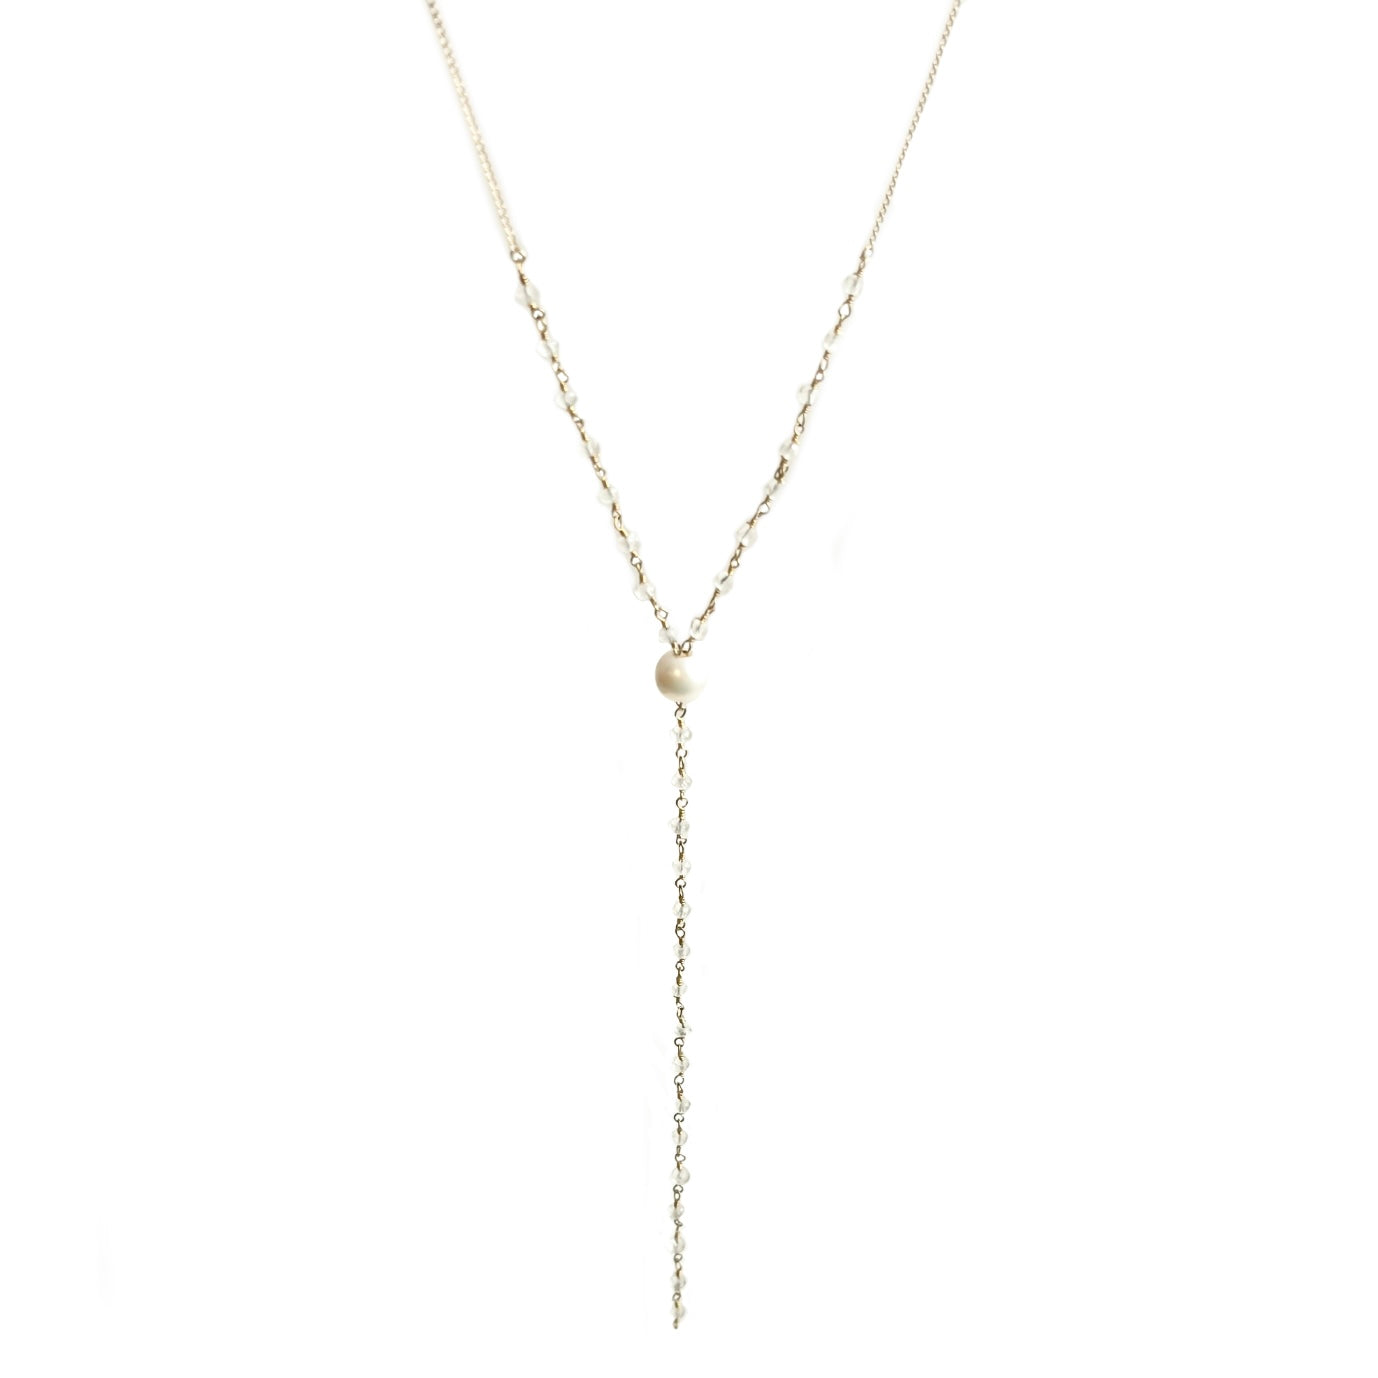 Pearl + Crystal Chain 'Y' Necklace